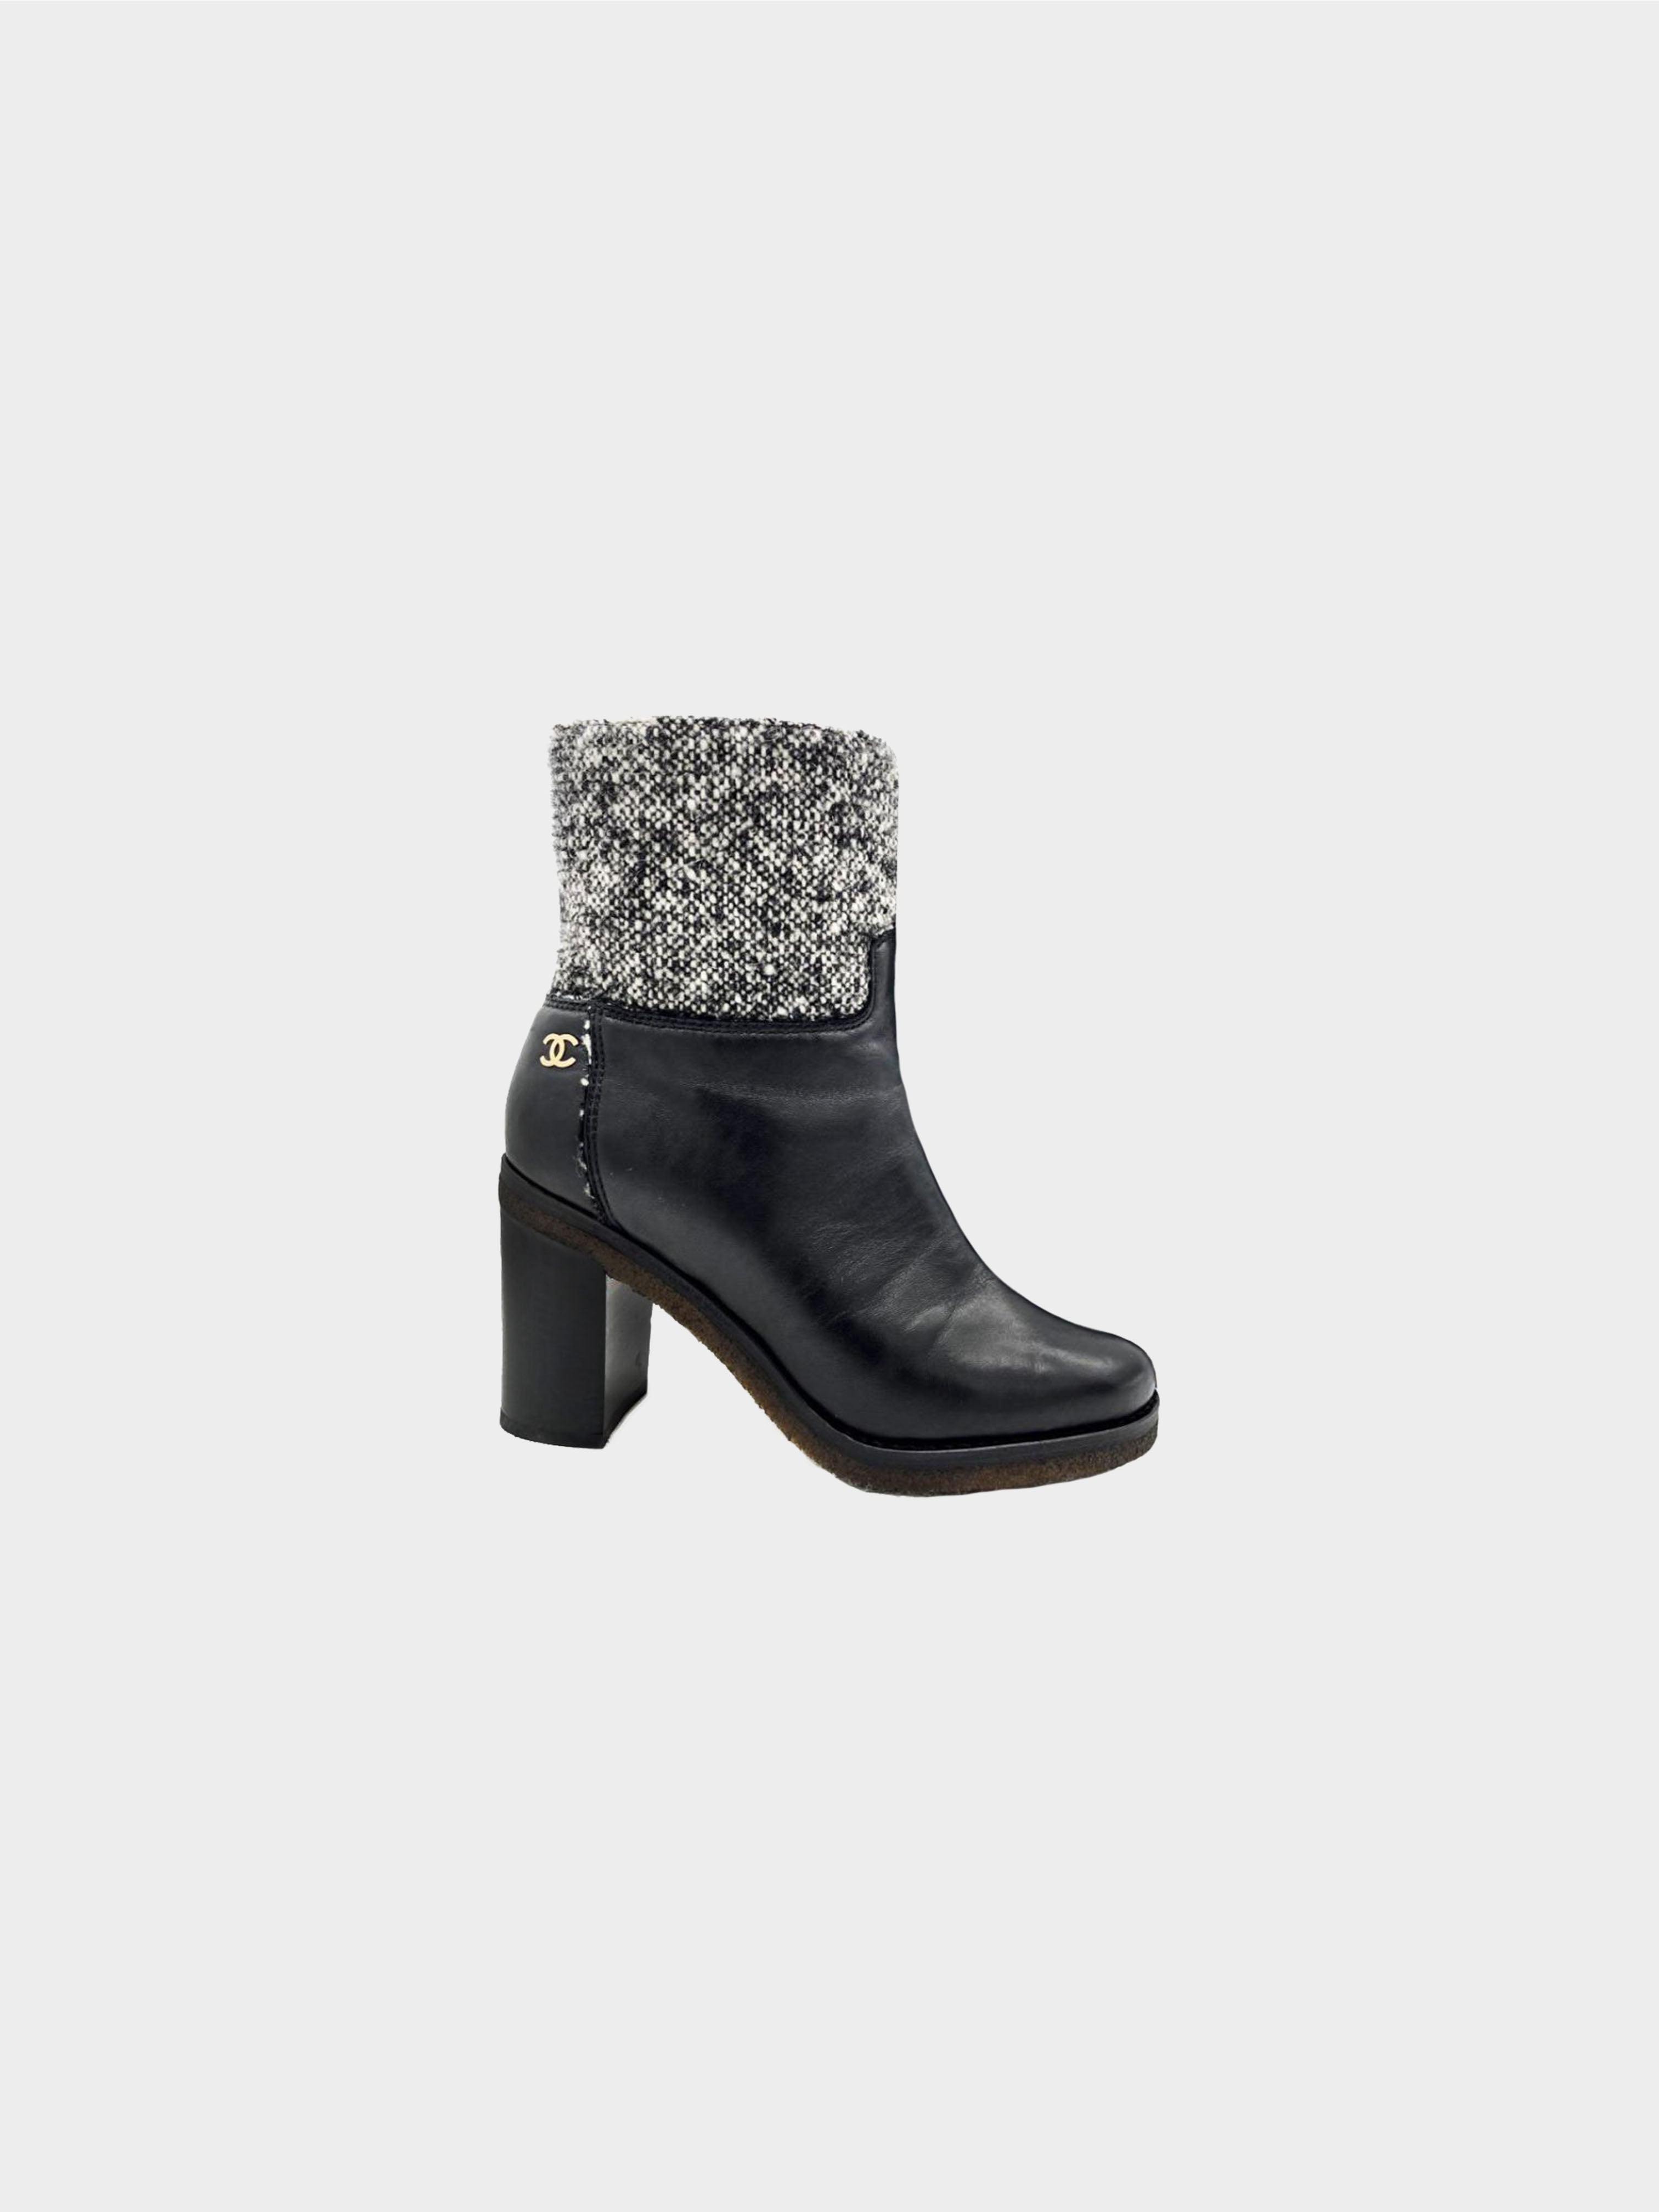 Chanel 2016 Black Leather and Tweed Short Boots